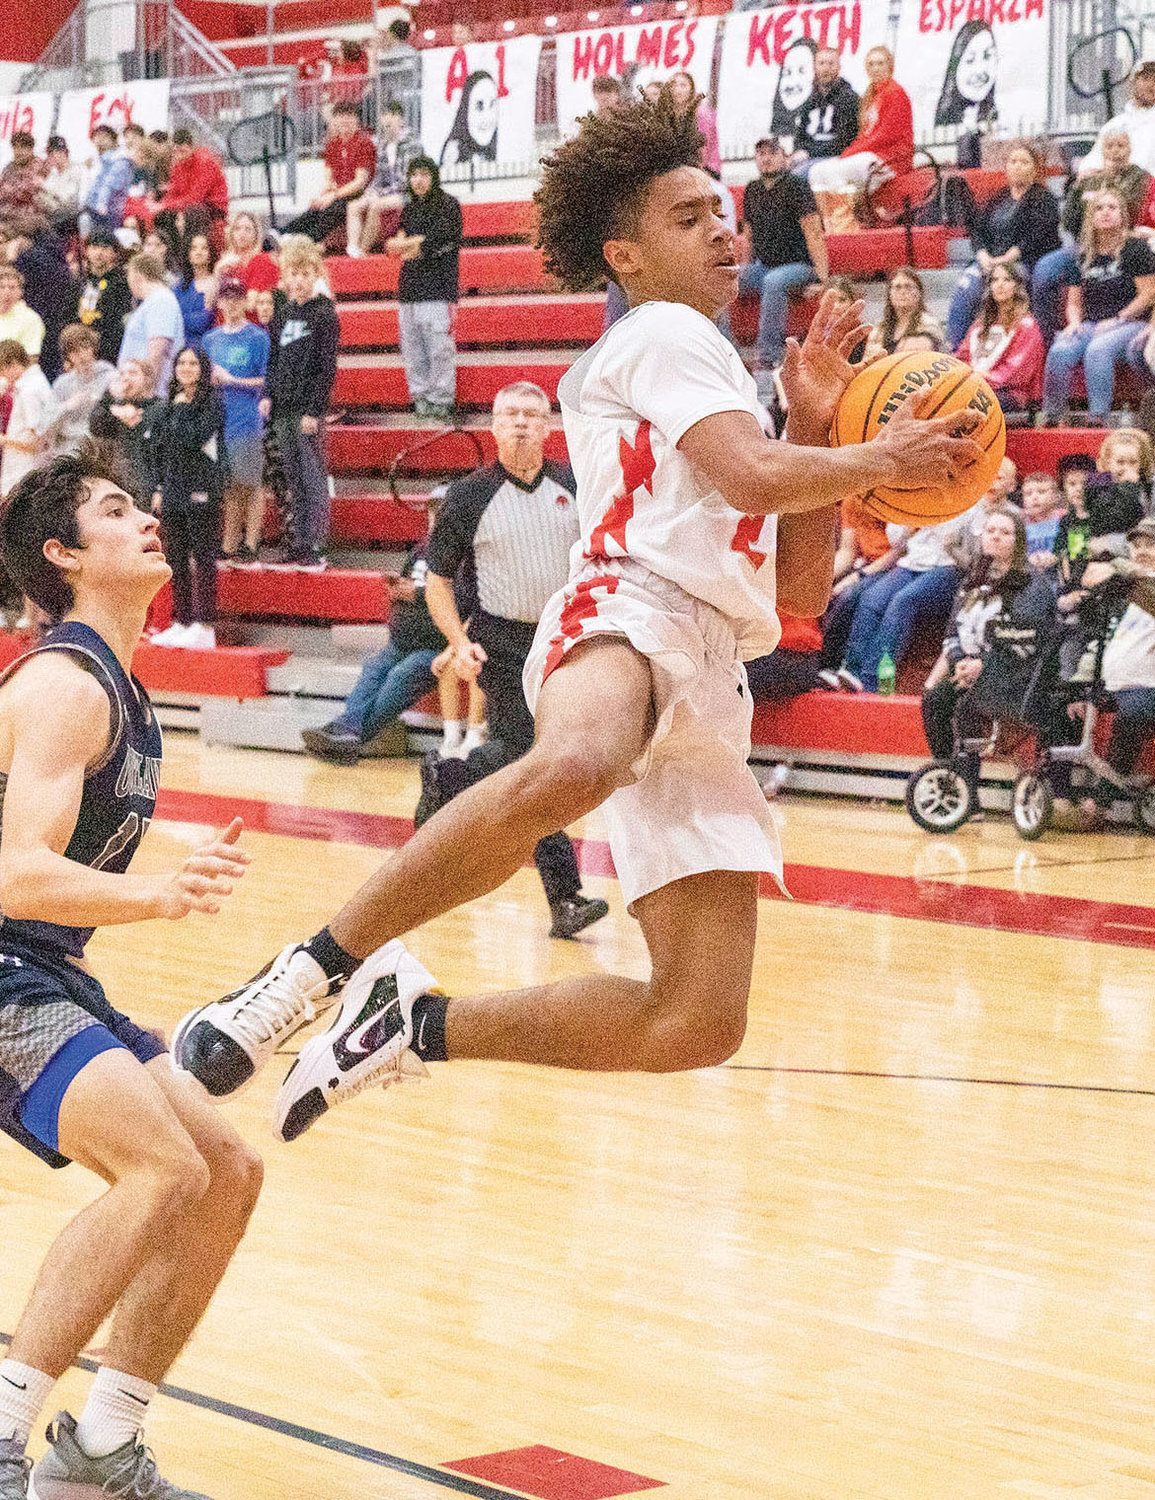 Purcell freshman Kobe Freeman flies down the lane Monday night during the Dragons’ 54-49 win over No. 4 ranked Marlow. Freeman scored nine points.